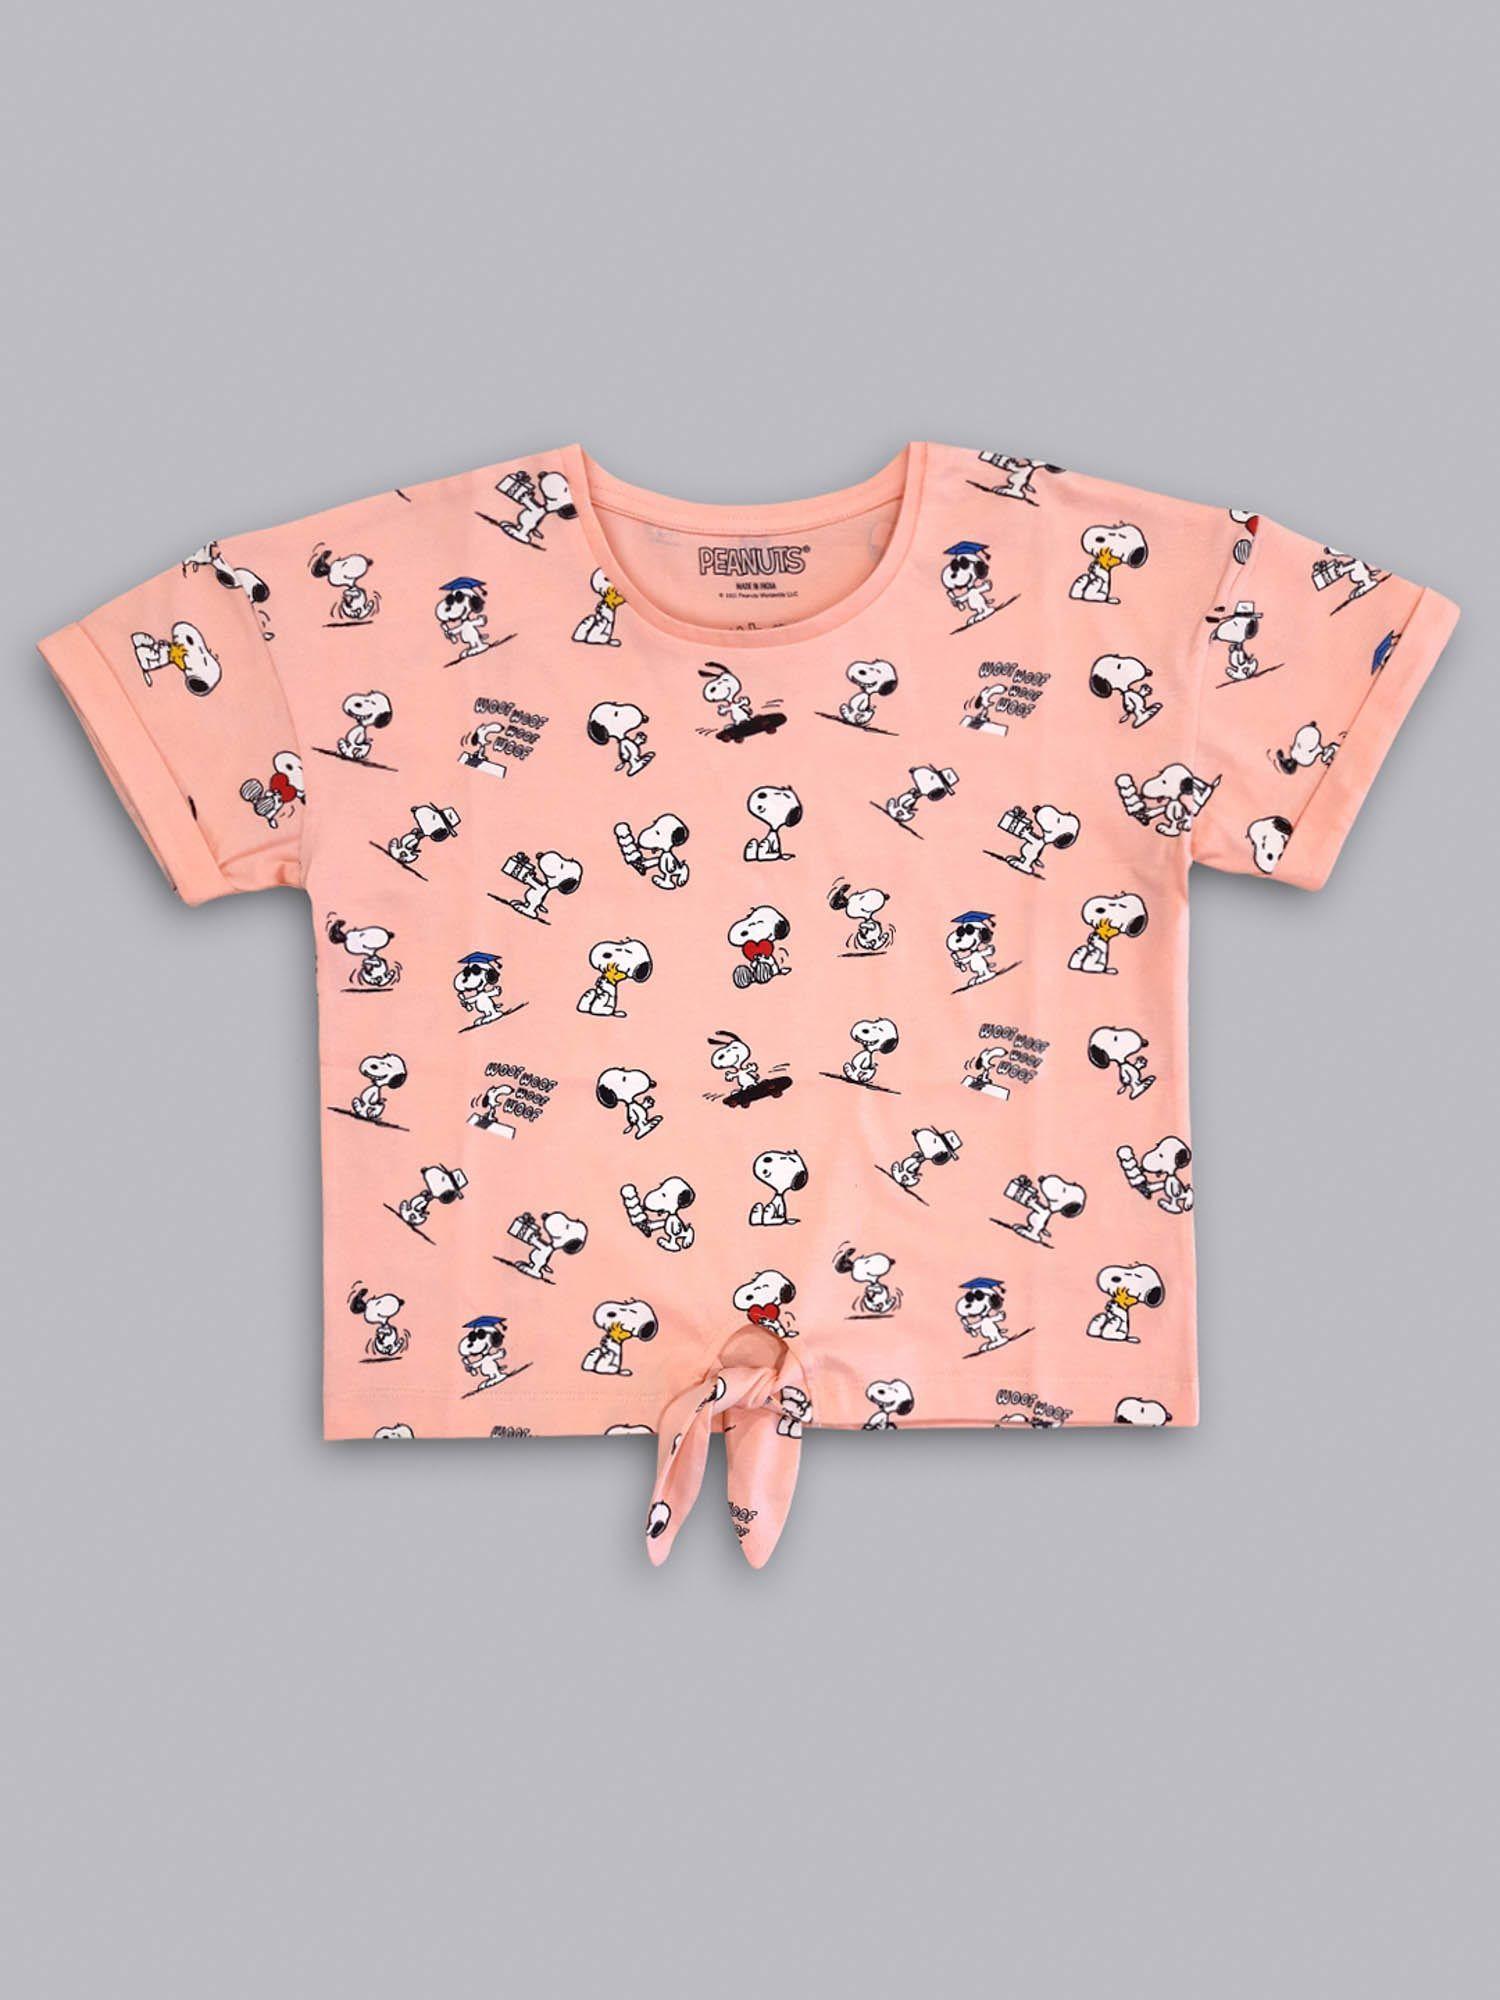 peanuts featured top for girls